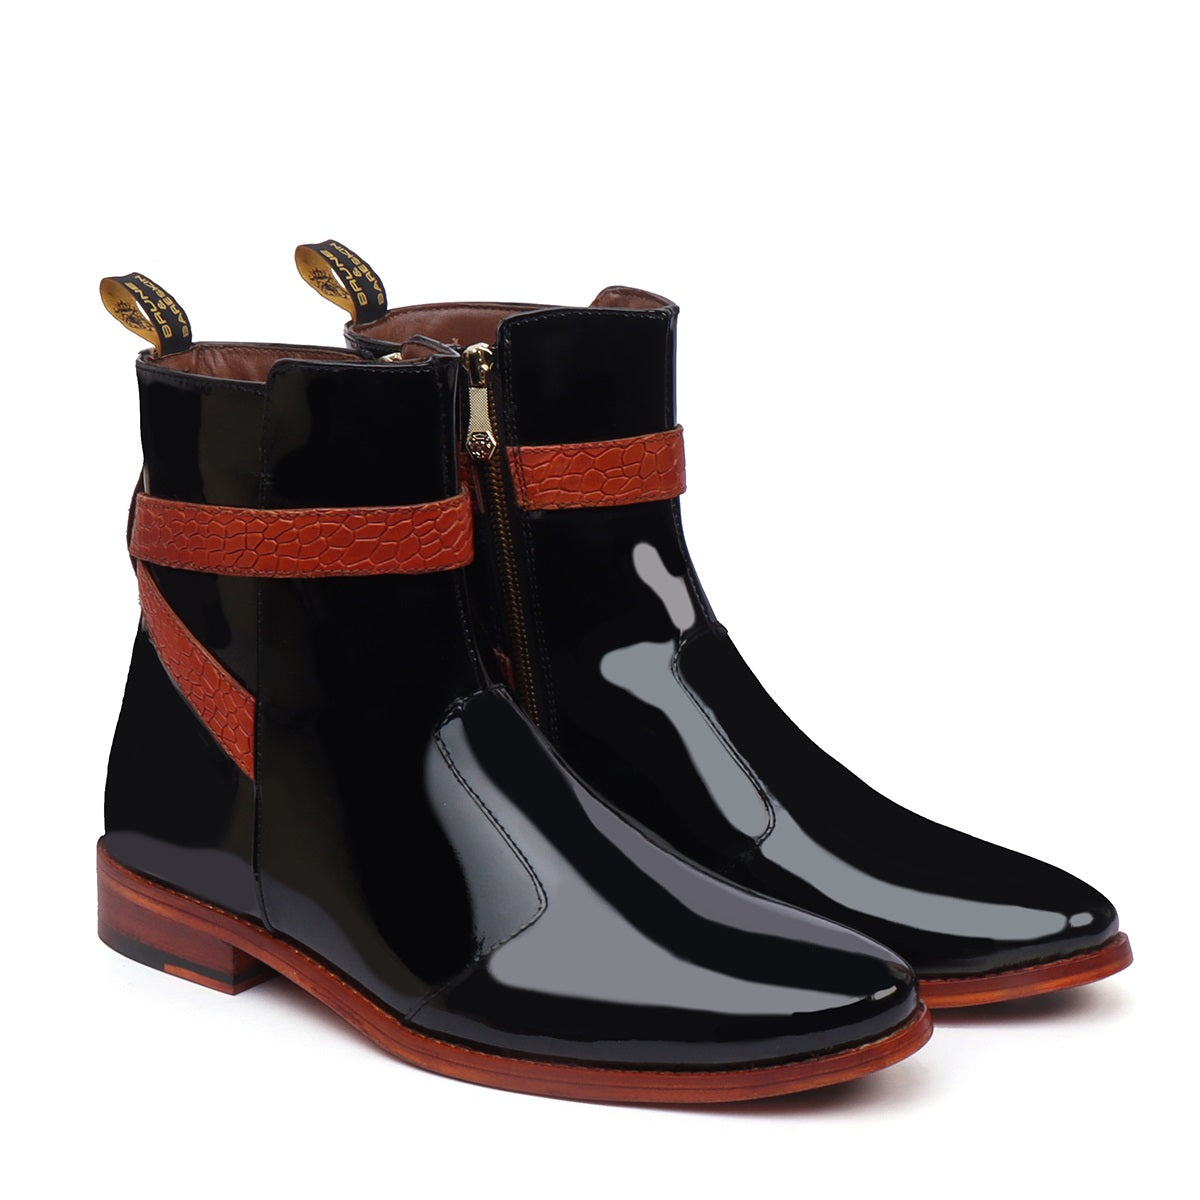 Black Patent Jodhpur Riding Boots with Tan Croco Leather Wrapped Strap Boots by Brune & Bareskin